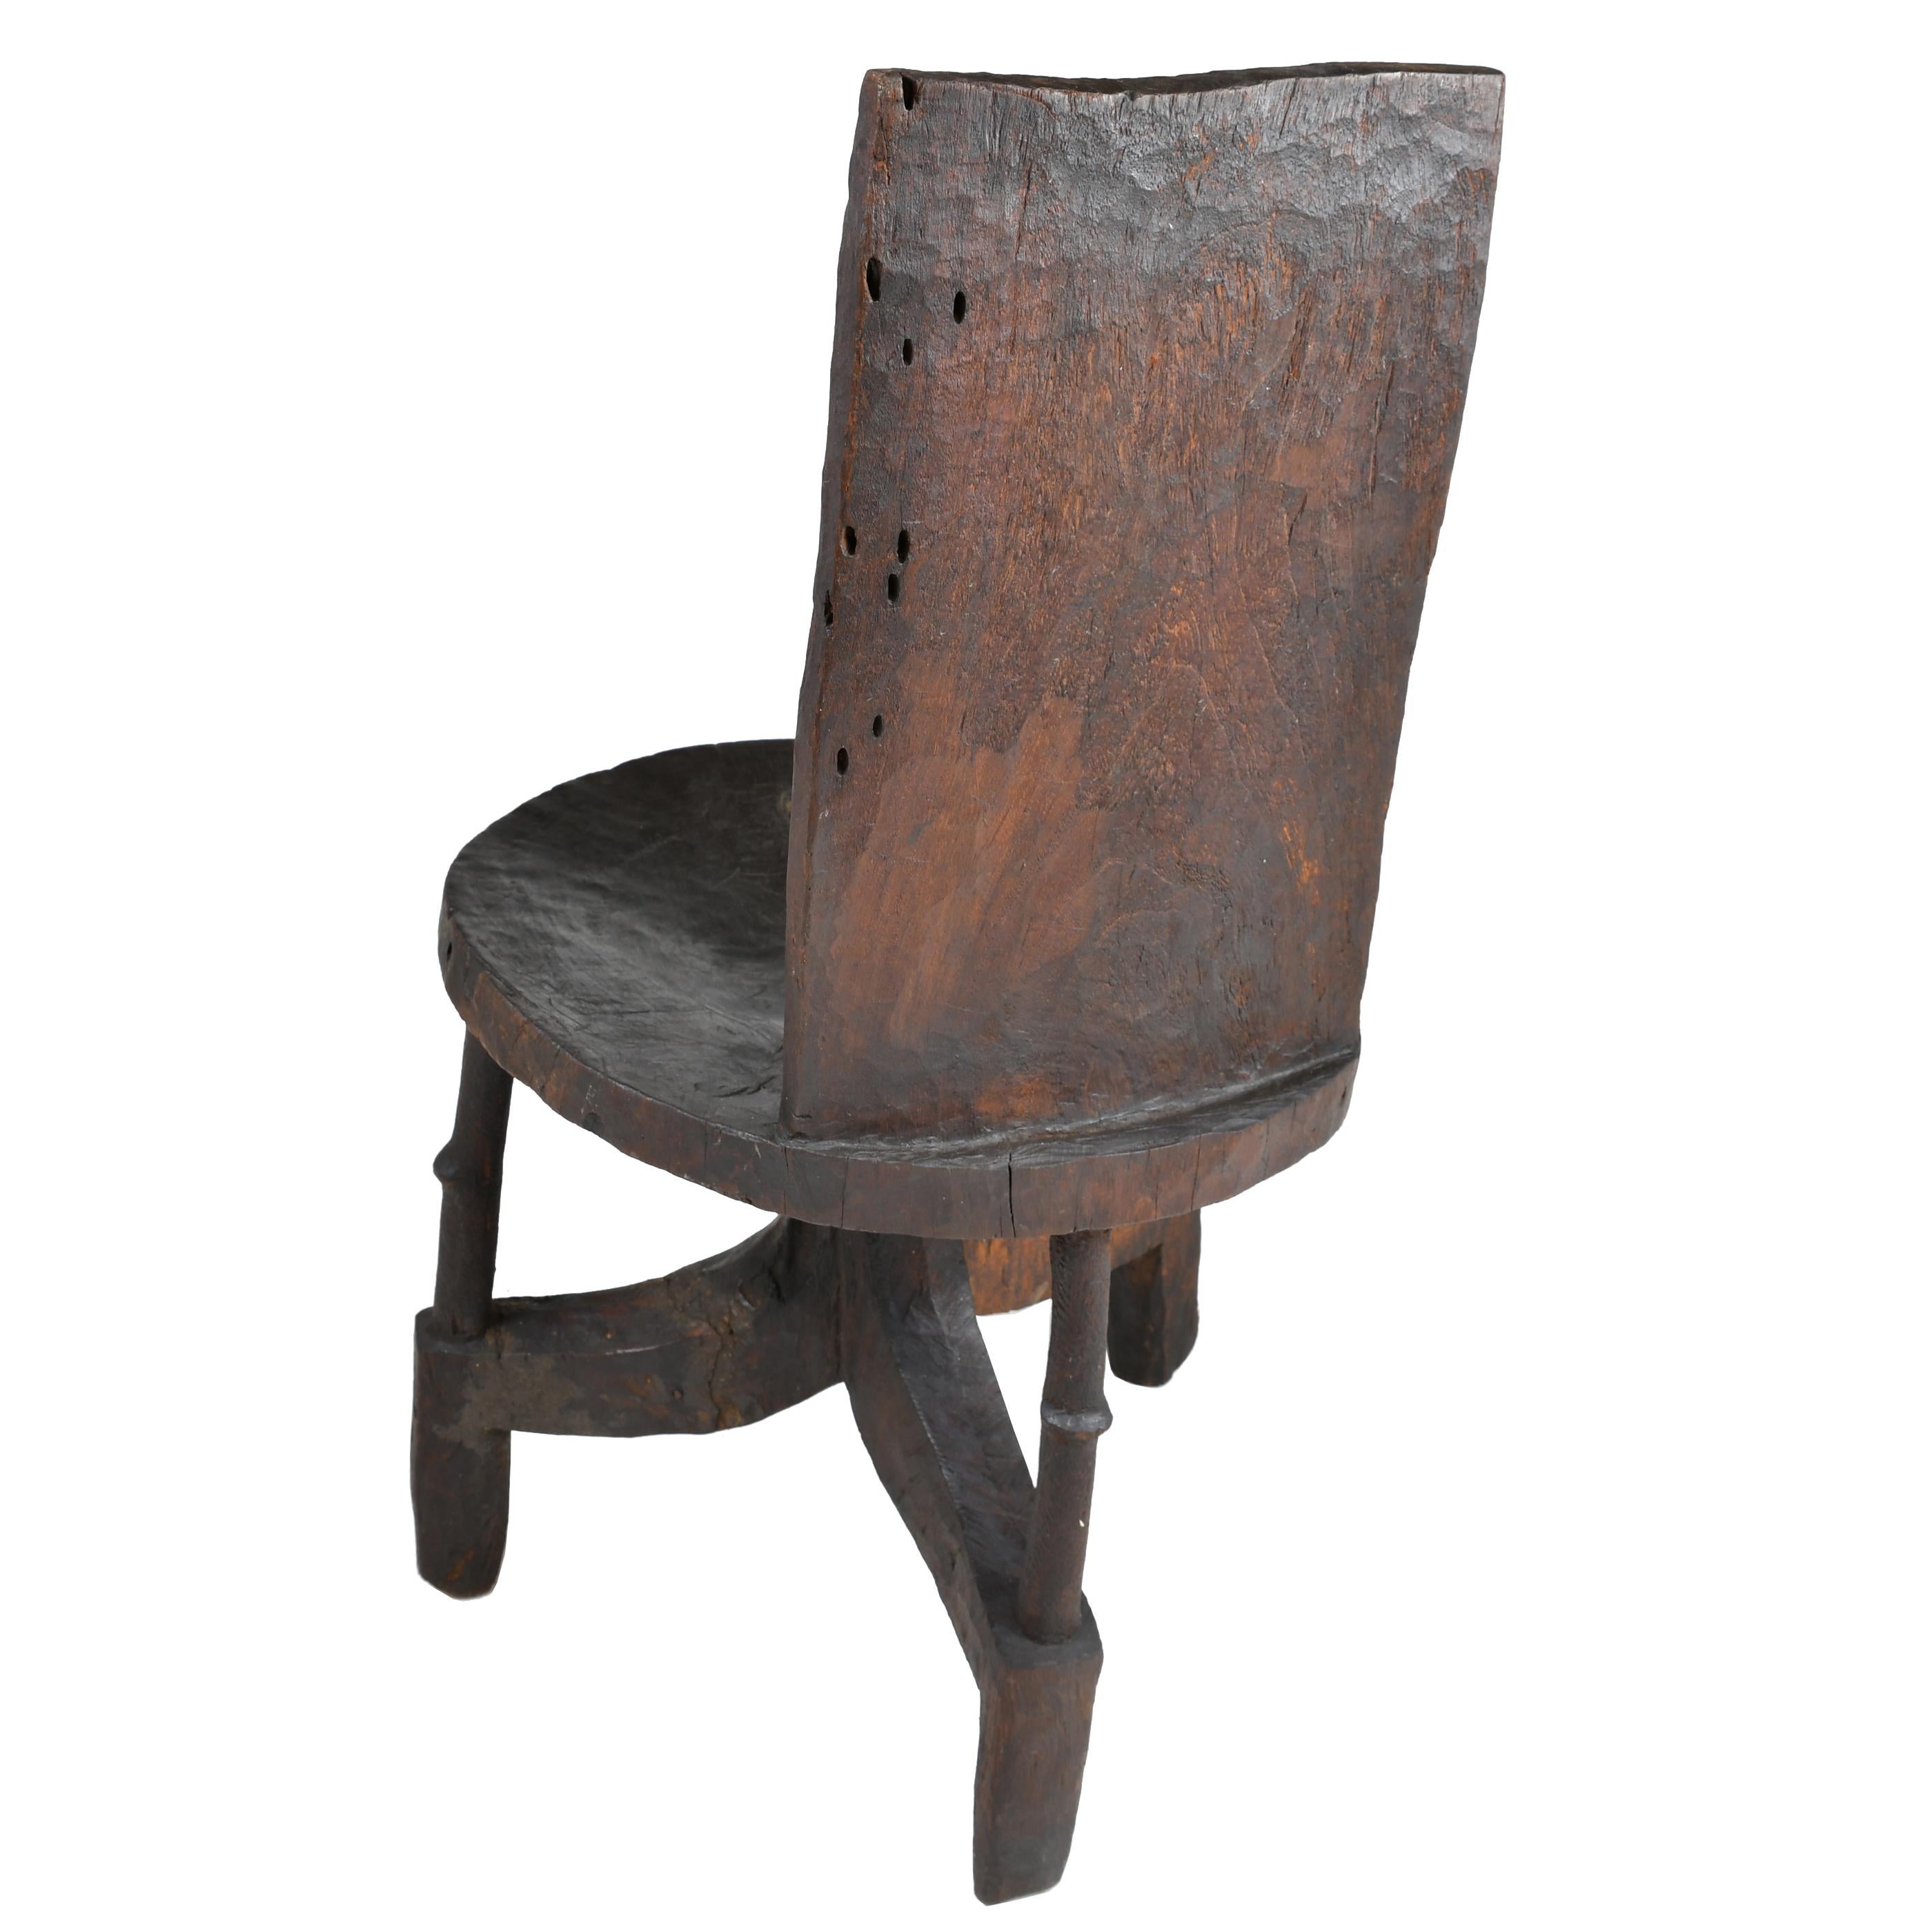 Hand-Carved African Chieftain Chair from Oromo People in Ethiopia, circa Early 1900s For Sale